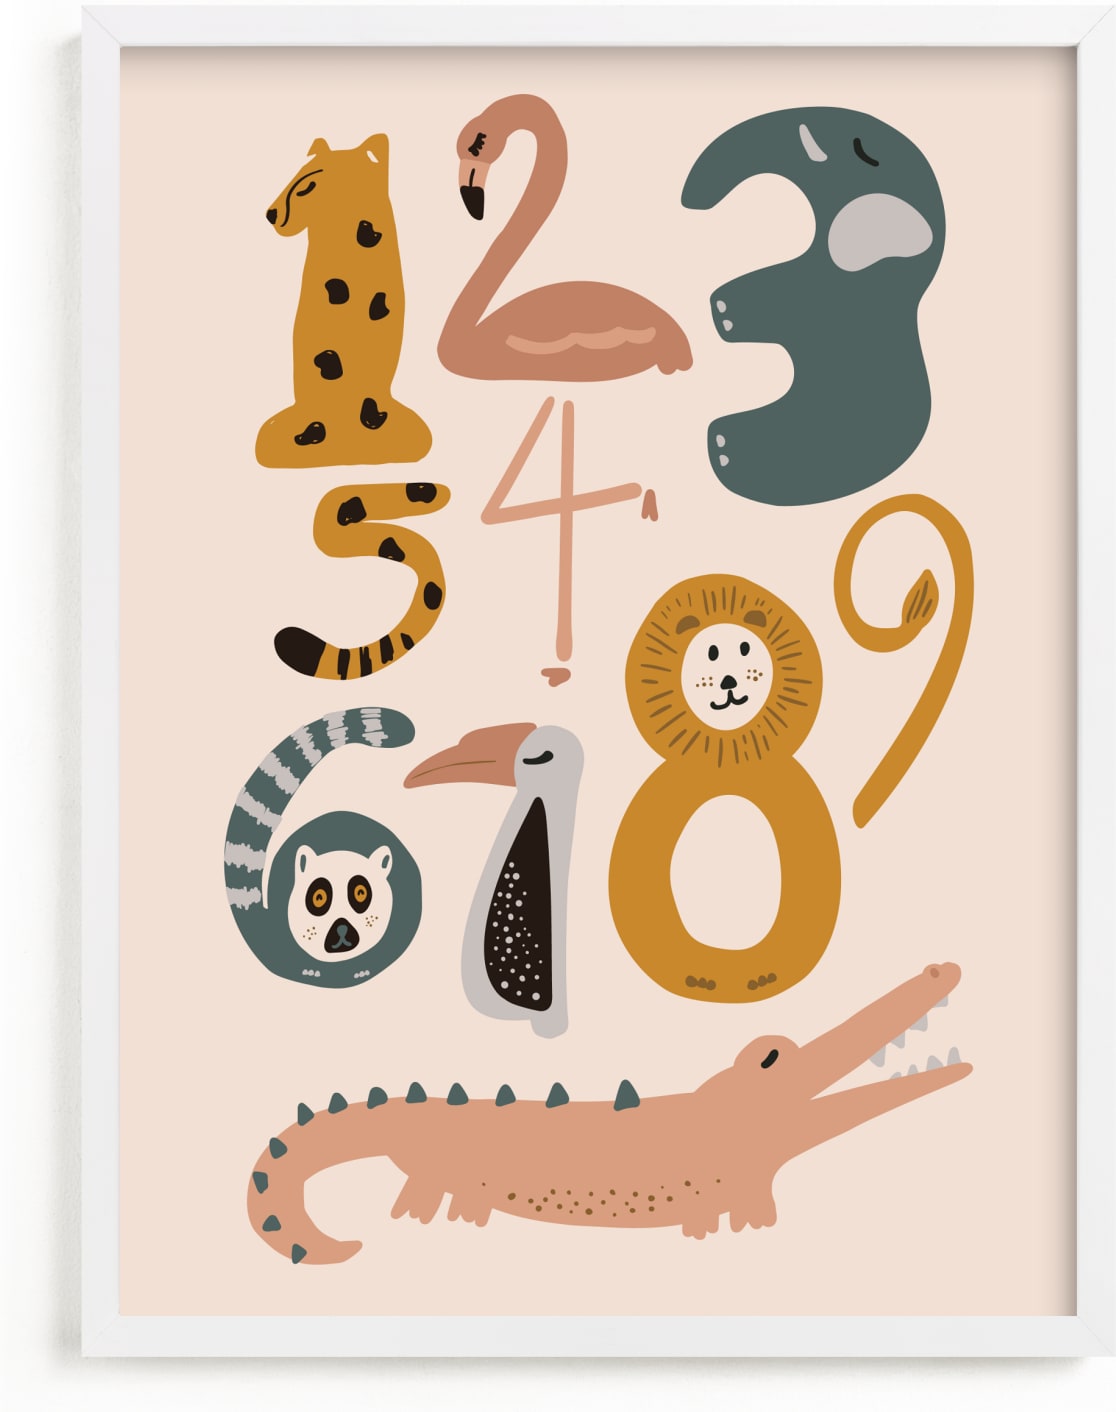 This is a colorful art by Jenna Holcomb called Safari Friends Numerals.